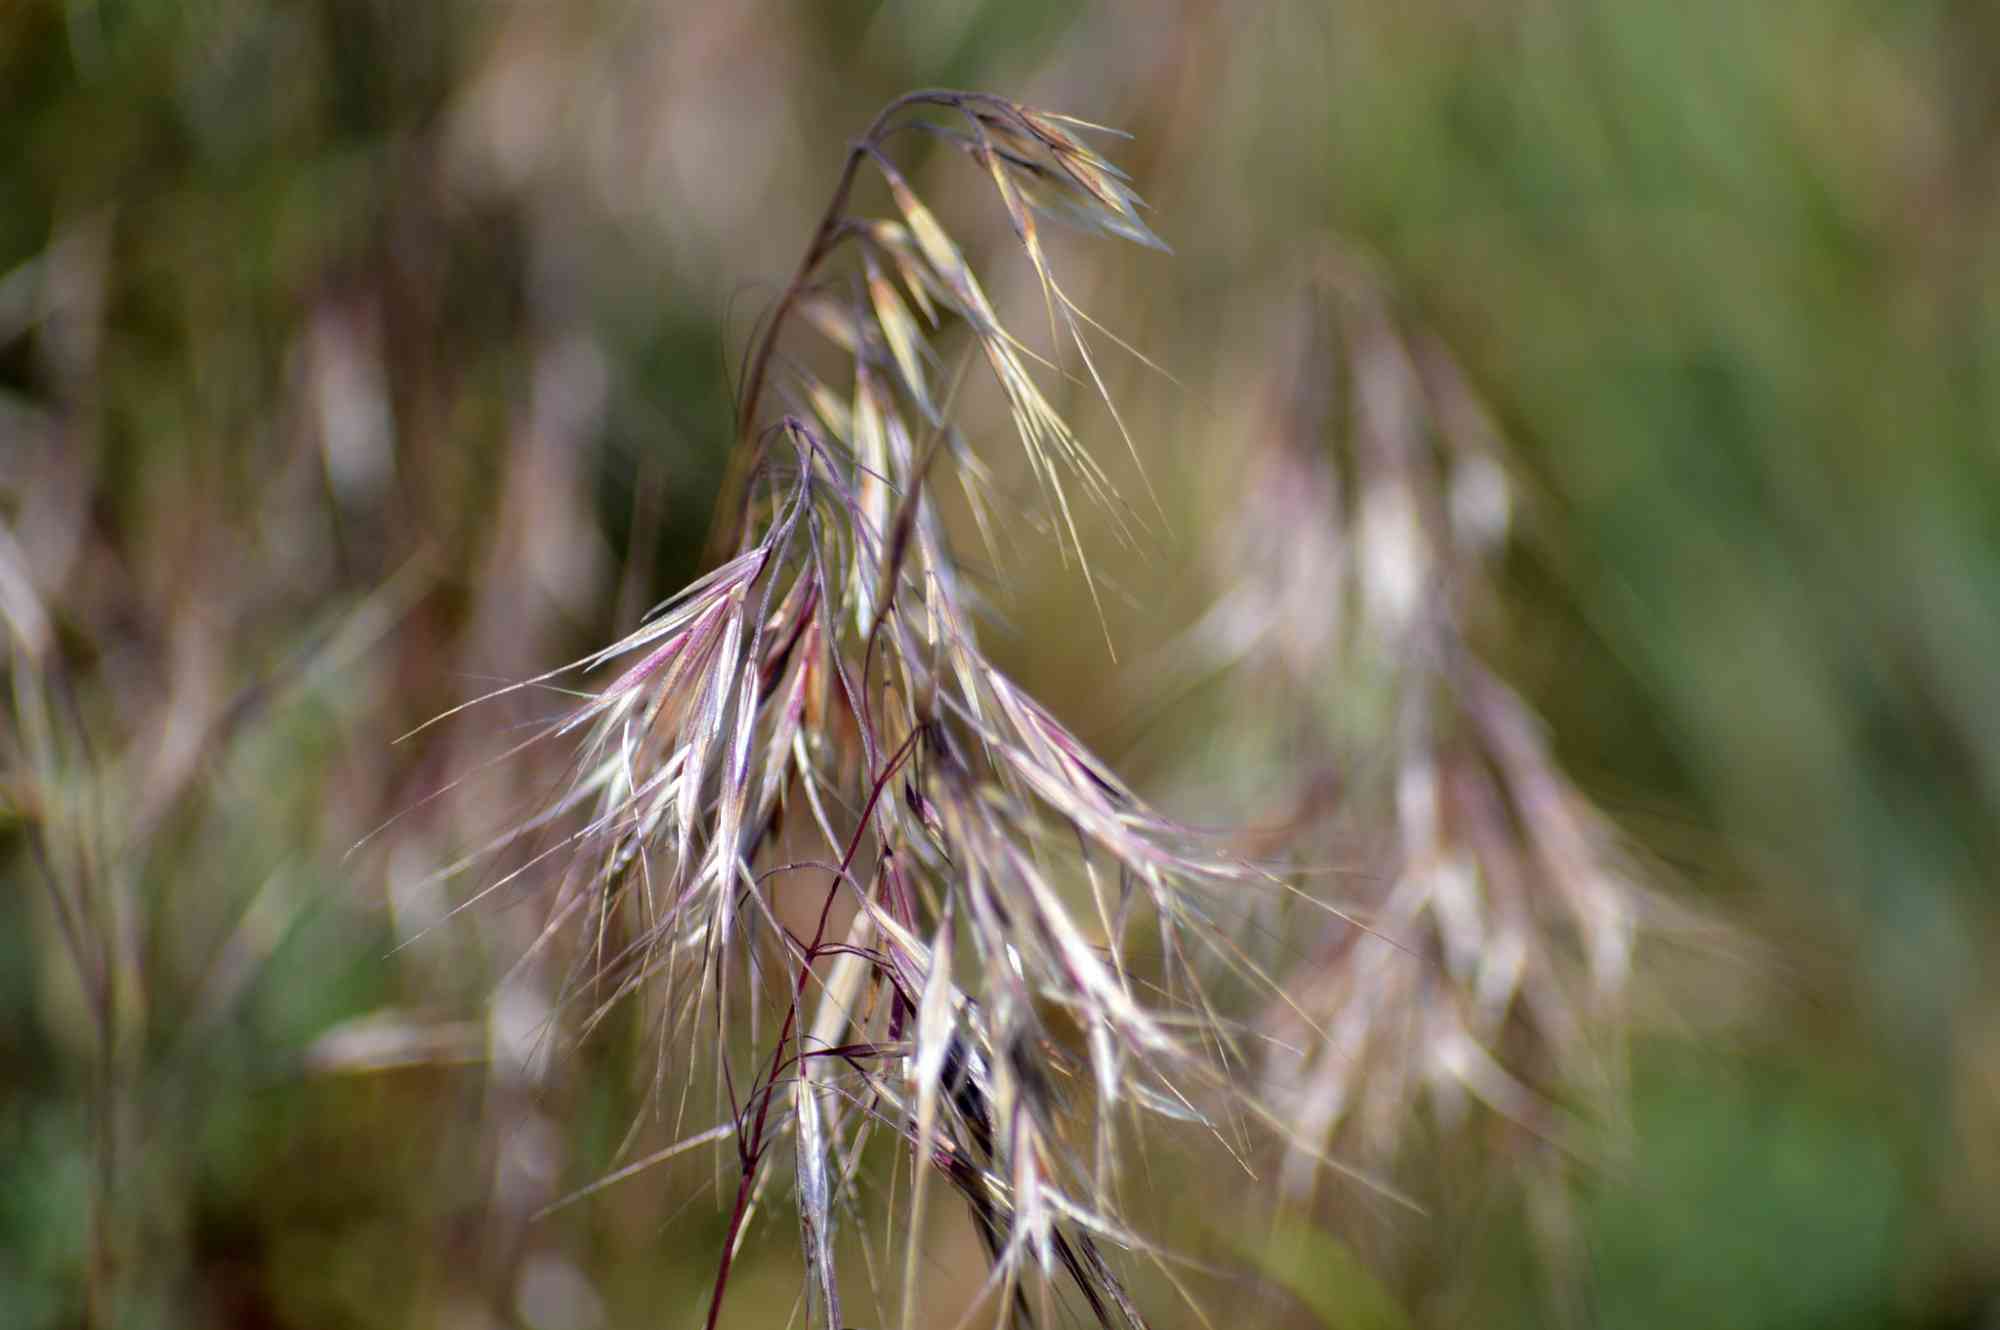 Close-up of cheatgrass, a non-native weed that fuels wildland fires in the west, with its characteristic purple hues.